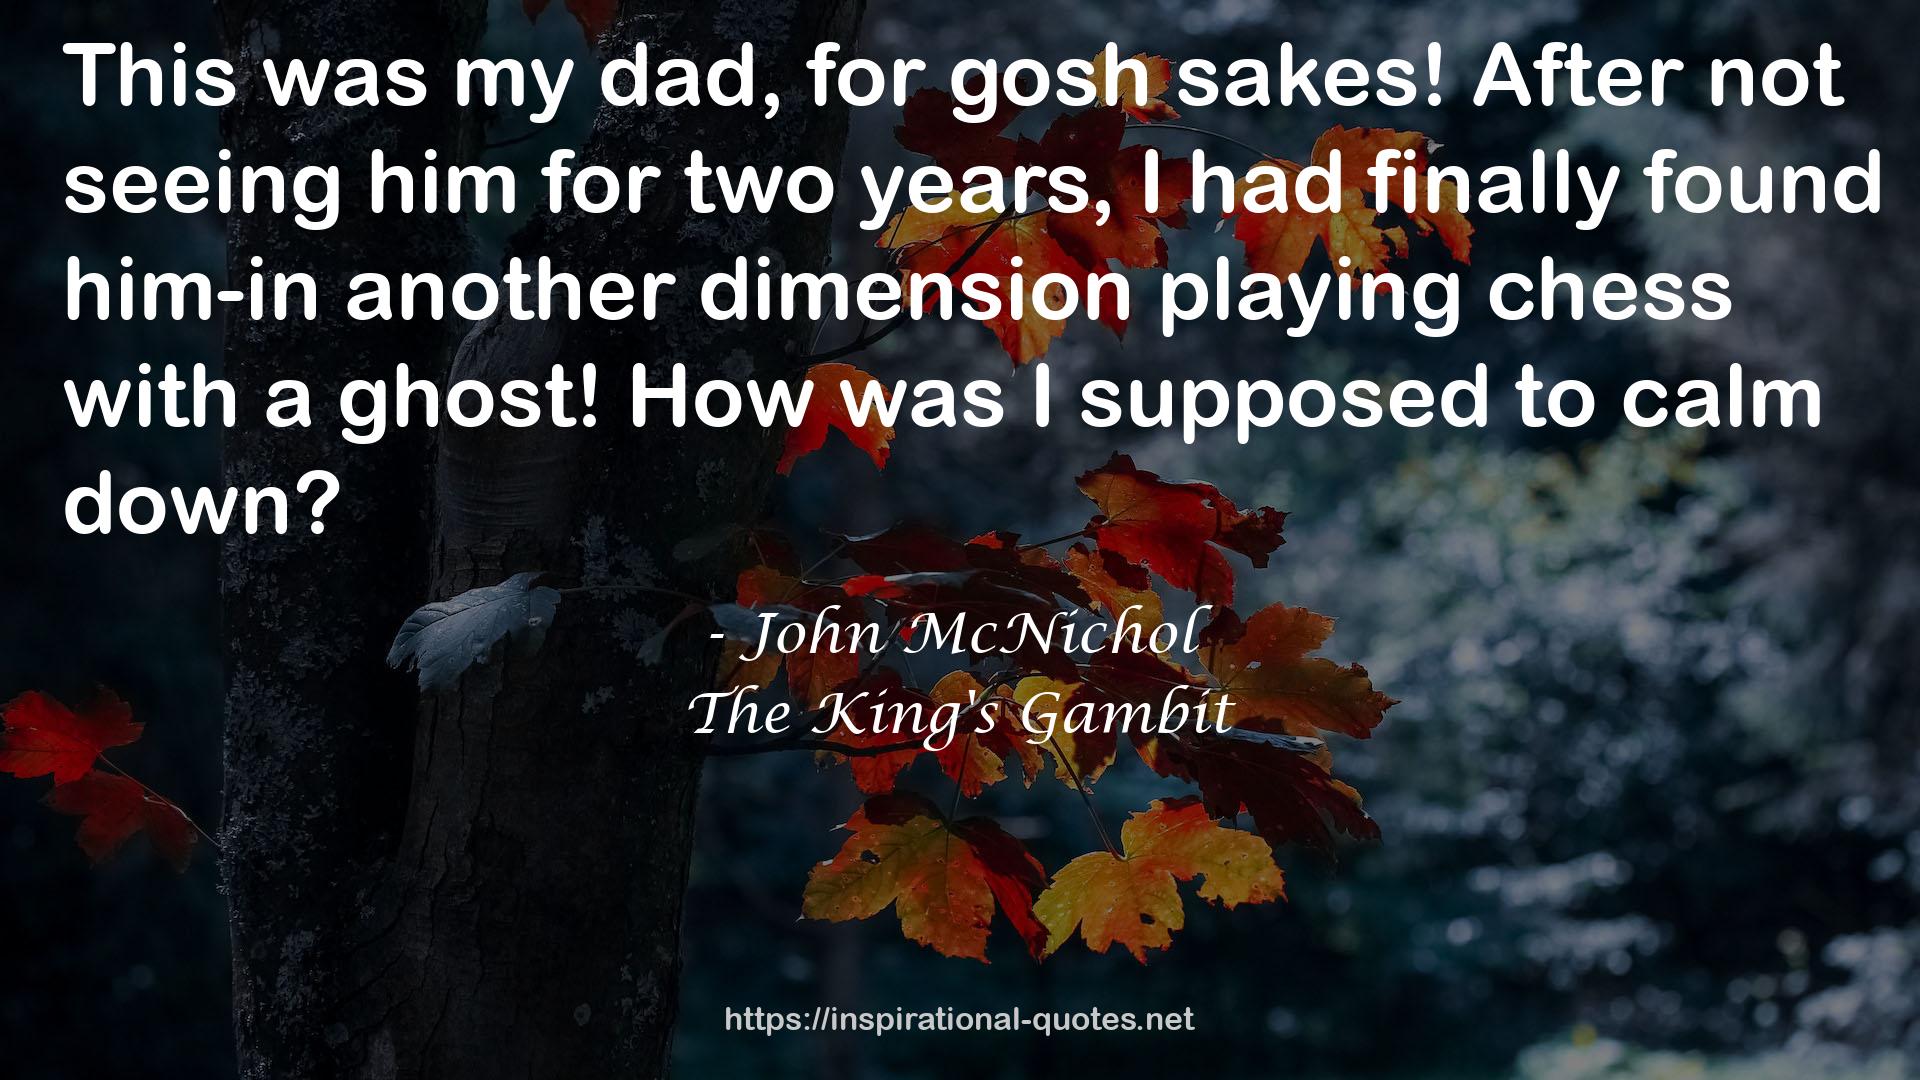 The King's Gambit QUOTES